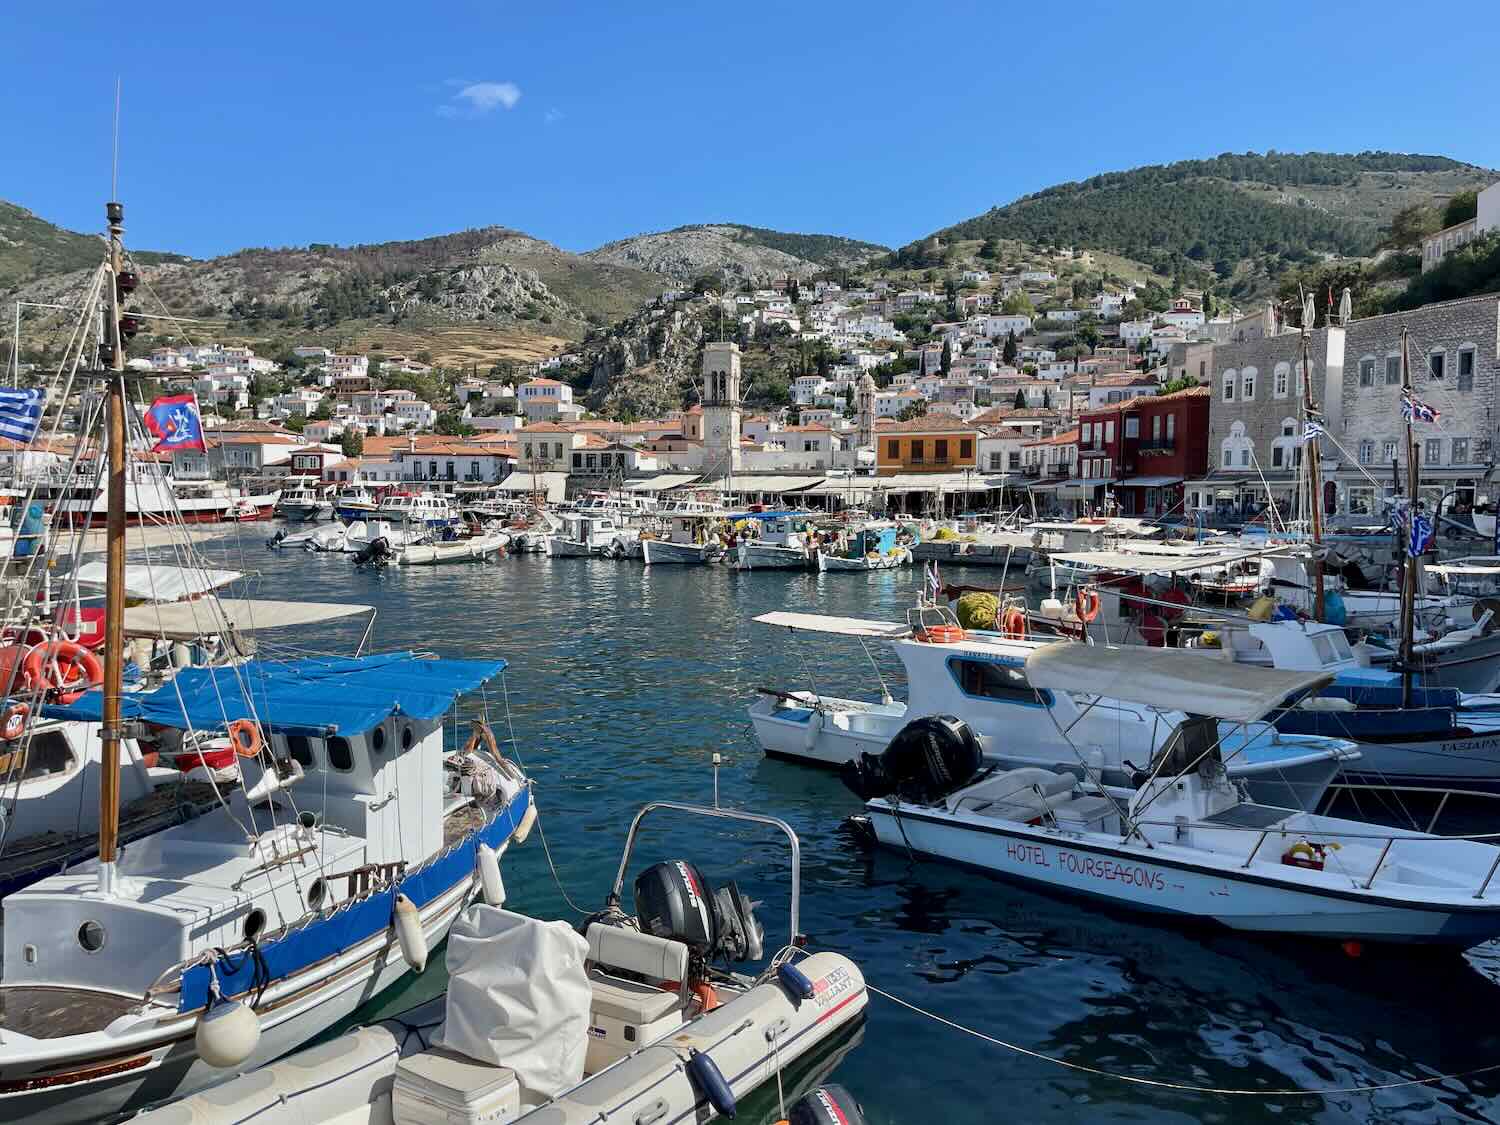 Vibrant Hydra harbor scene bustling with boats and yachts, framed by the picturesque hillside architecture of the island, under the clear blue Greek sky.